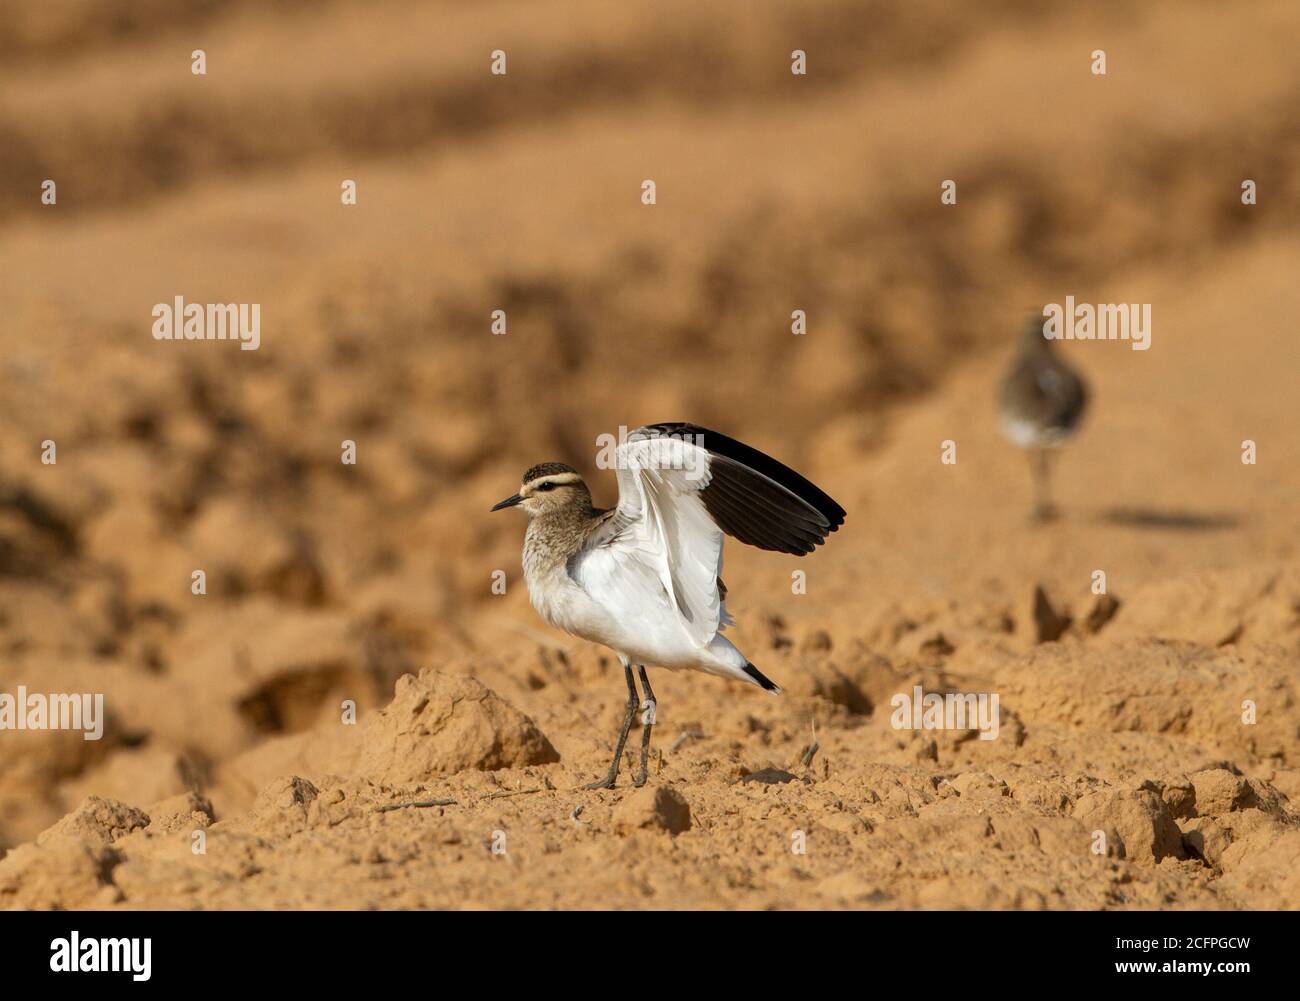 sociable plover (Chettusia gregaria, Vanellus gregarius), standing on sandy ground and stretching, rare vagrant to the Middle Eastern region, Israel Stock Photo